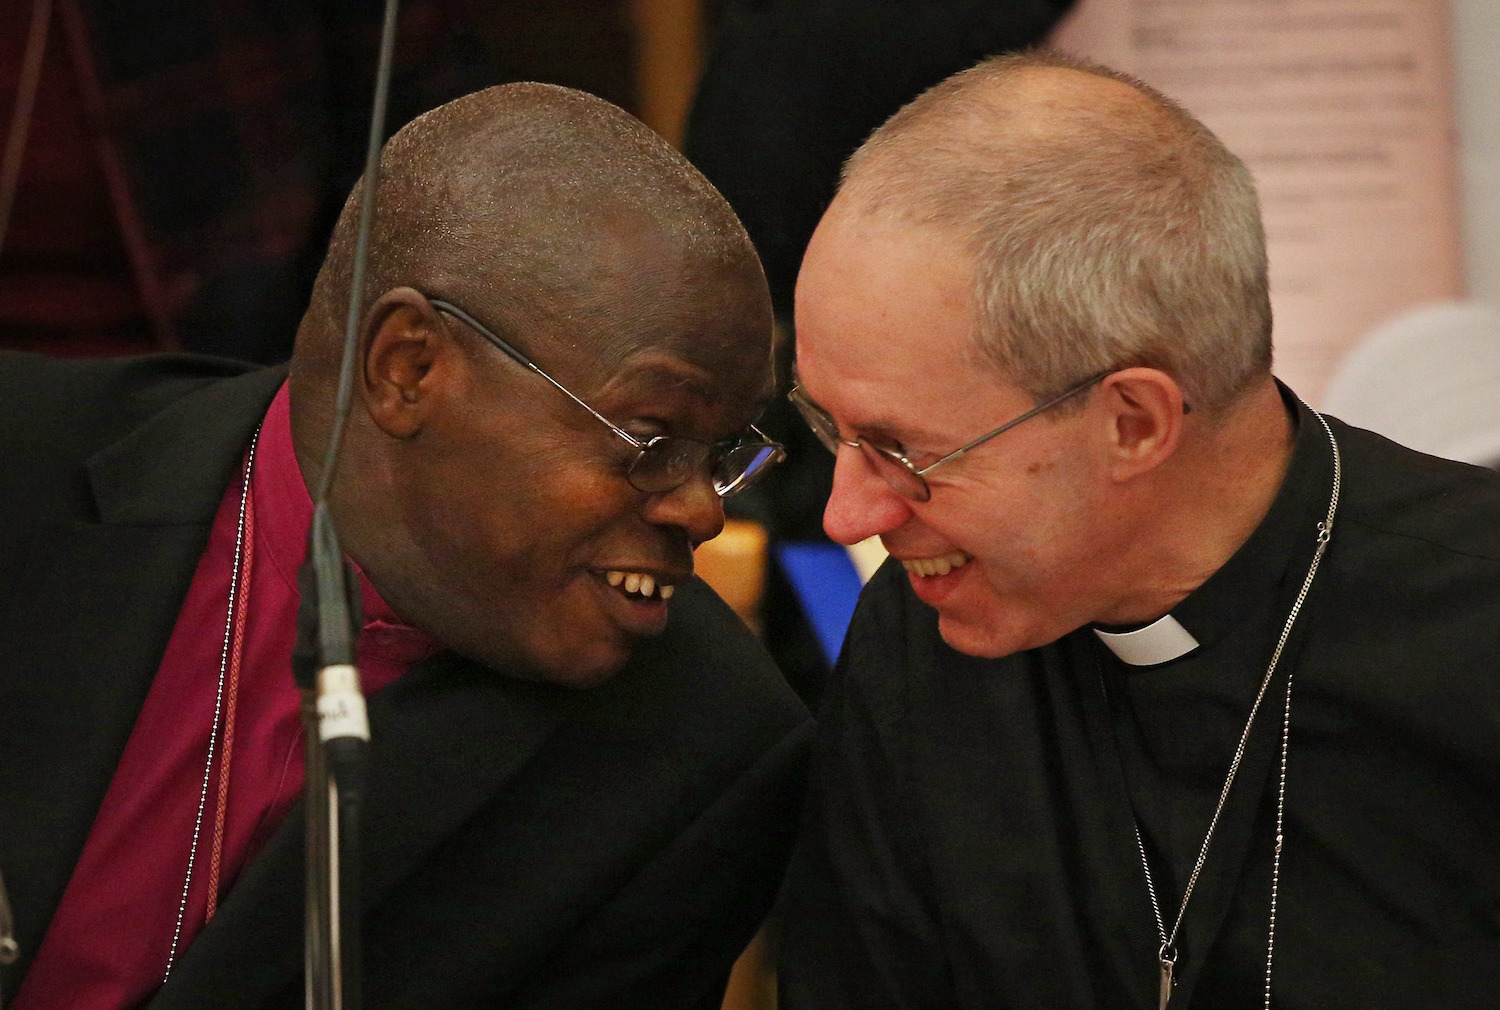 LONDON, ENGLAND - NOVEMBER 20: The Archbishop of York John Sentamu (L) talks to The Archbishop of Canterbury Justin Welby during the General Synod at Church House on November 20, 2013 in London, England. The Church of England's governing body, known as the General Synod, is holding meetings this week where the issue of the ordination of women bishops will be debated. (Photo by Peter Macdiarmid/Getty Images)